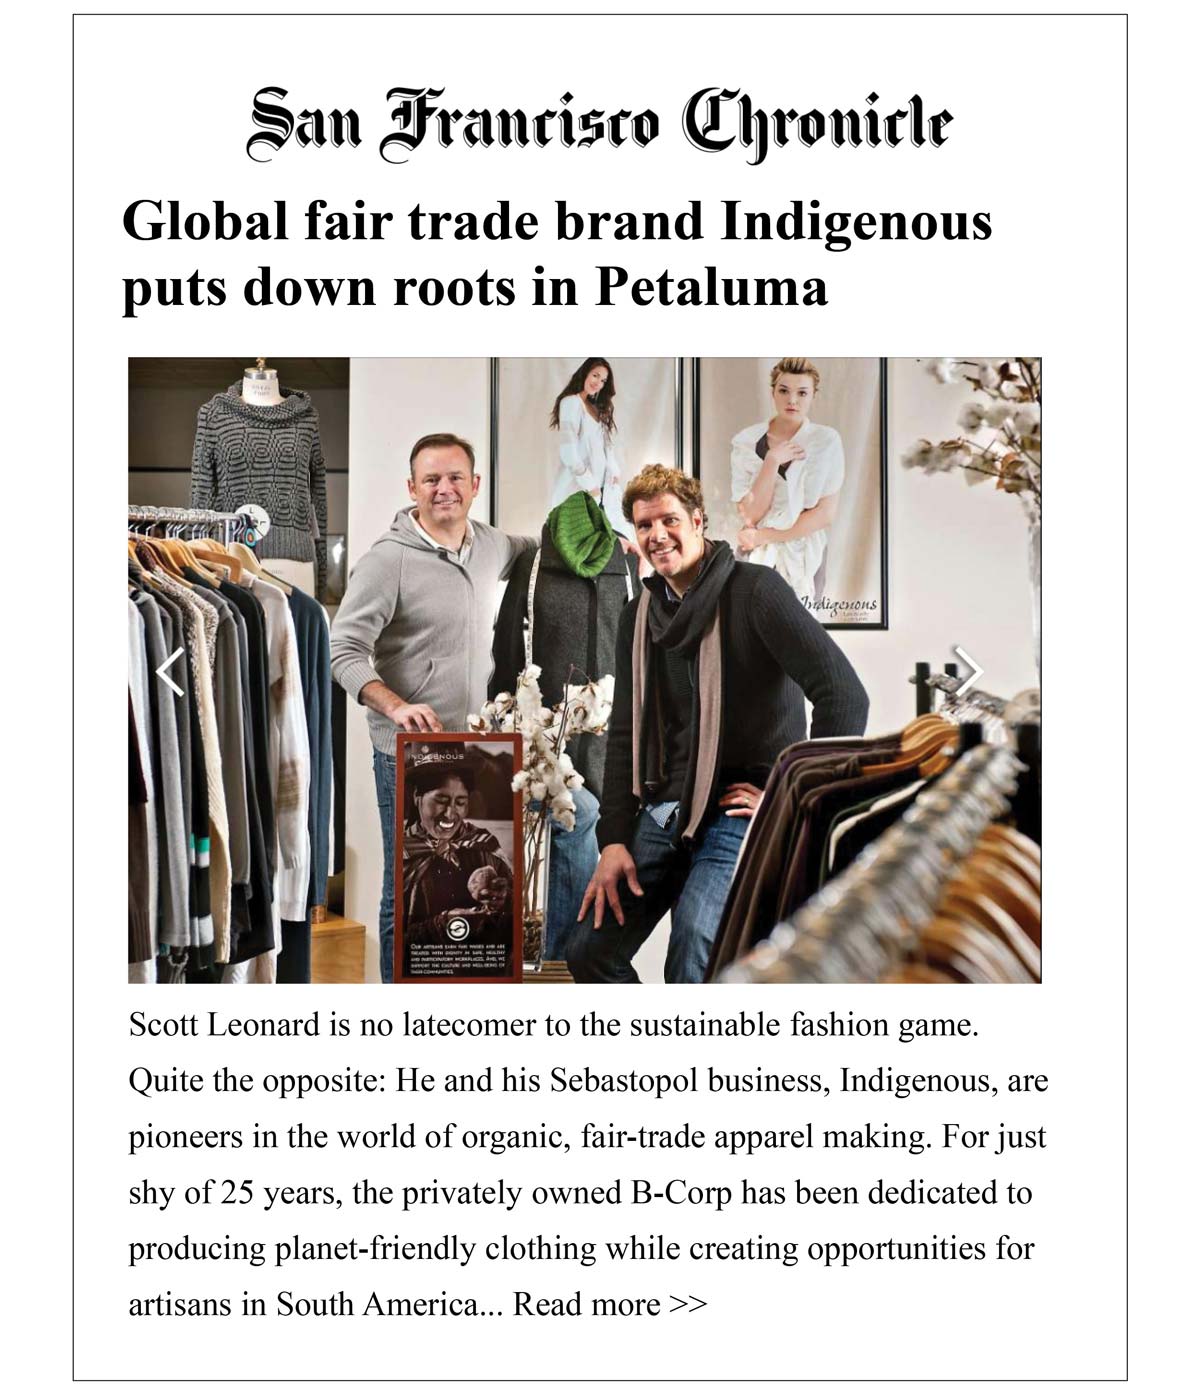 New Sustainable Fashion Store featured in the SF Chronicle | North Bay Ethical Shopping